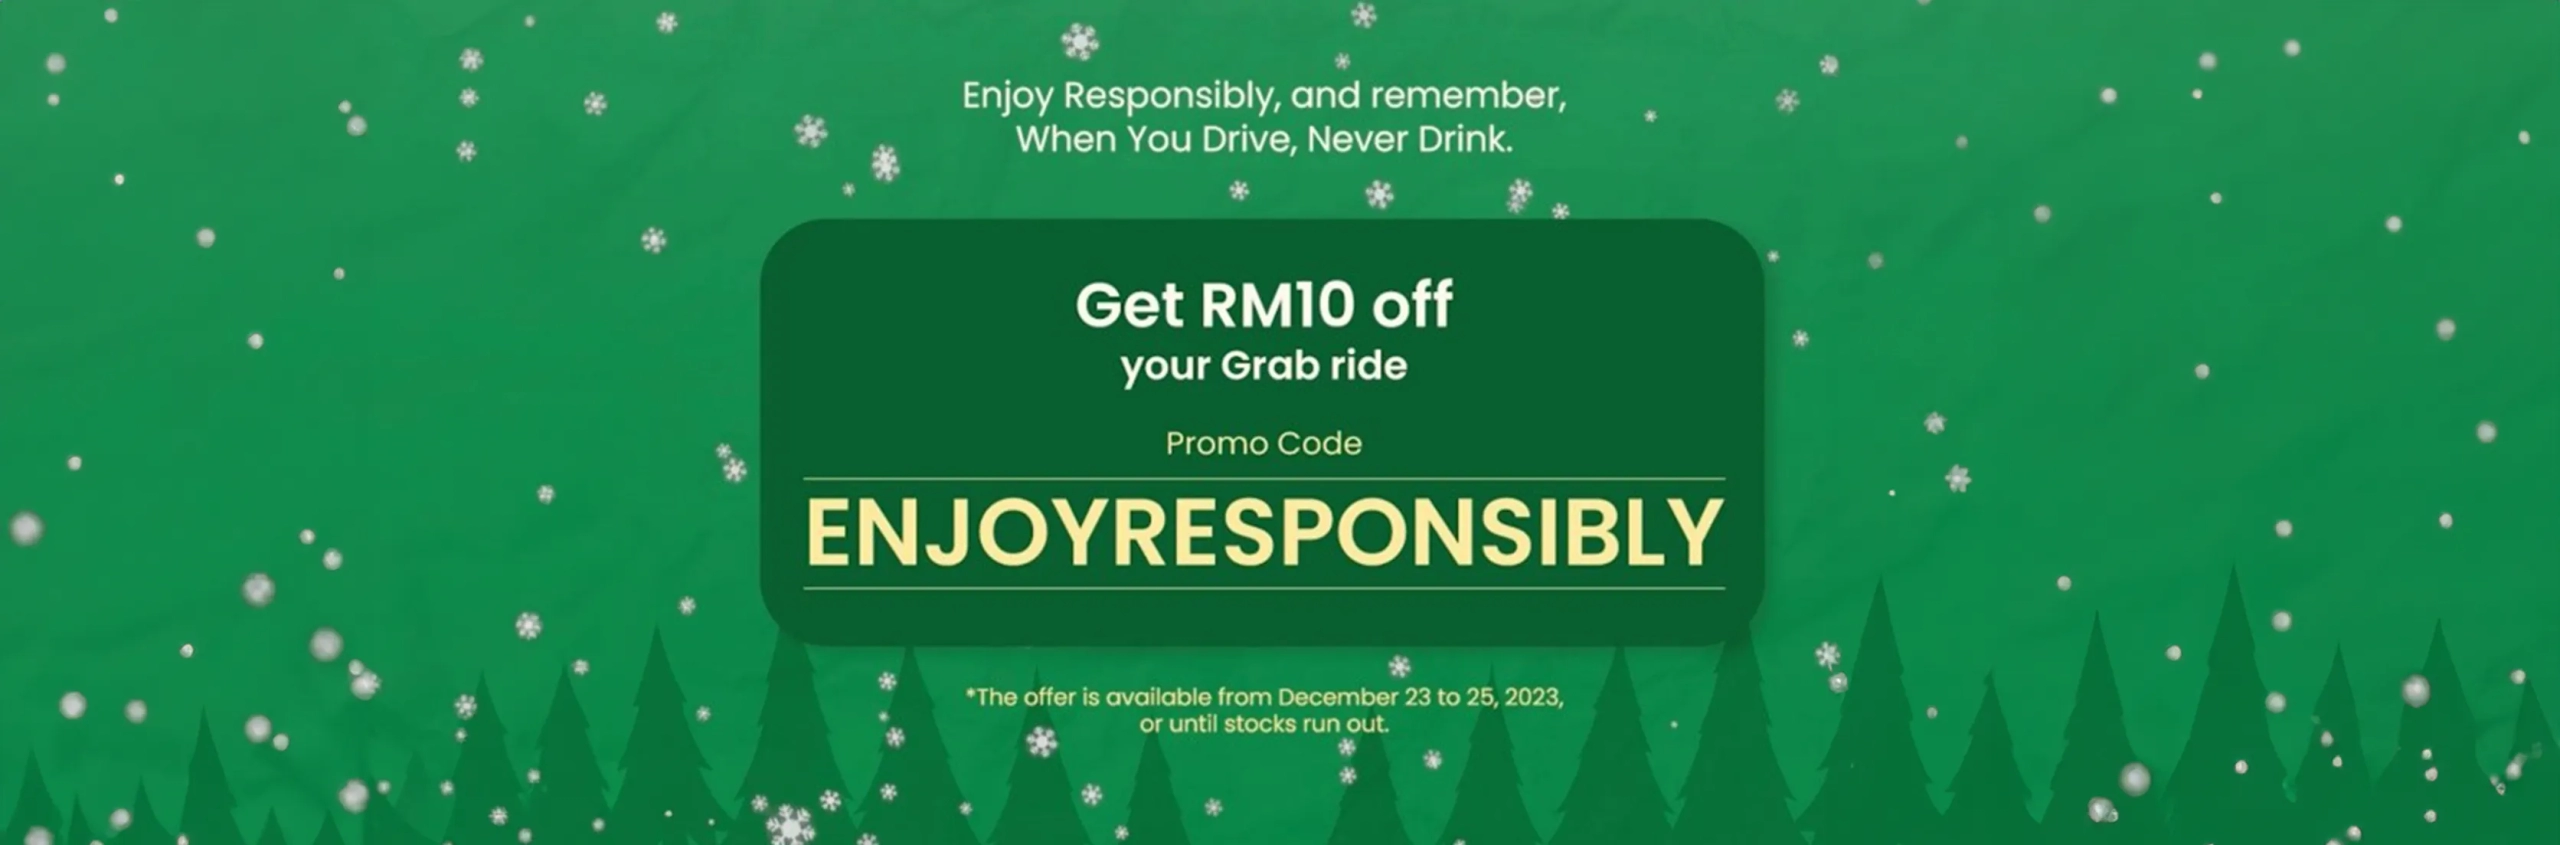 Enjoy-Responsibly-and-Grab-a-Ride-This-Festive-Season_Banner-scaled-1